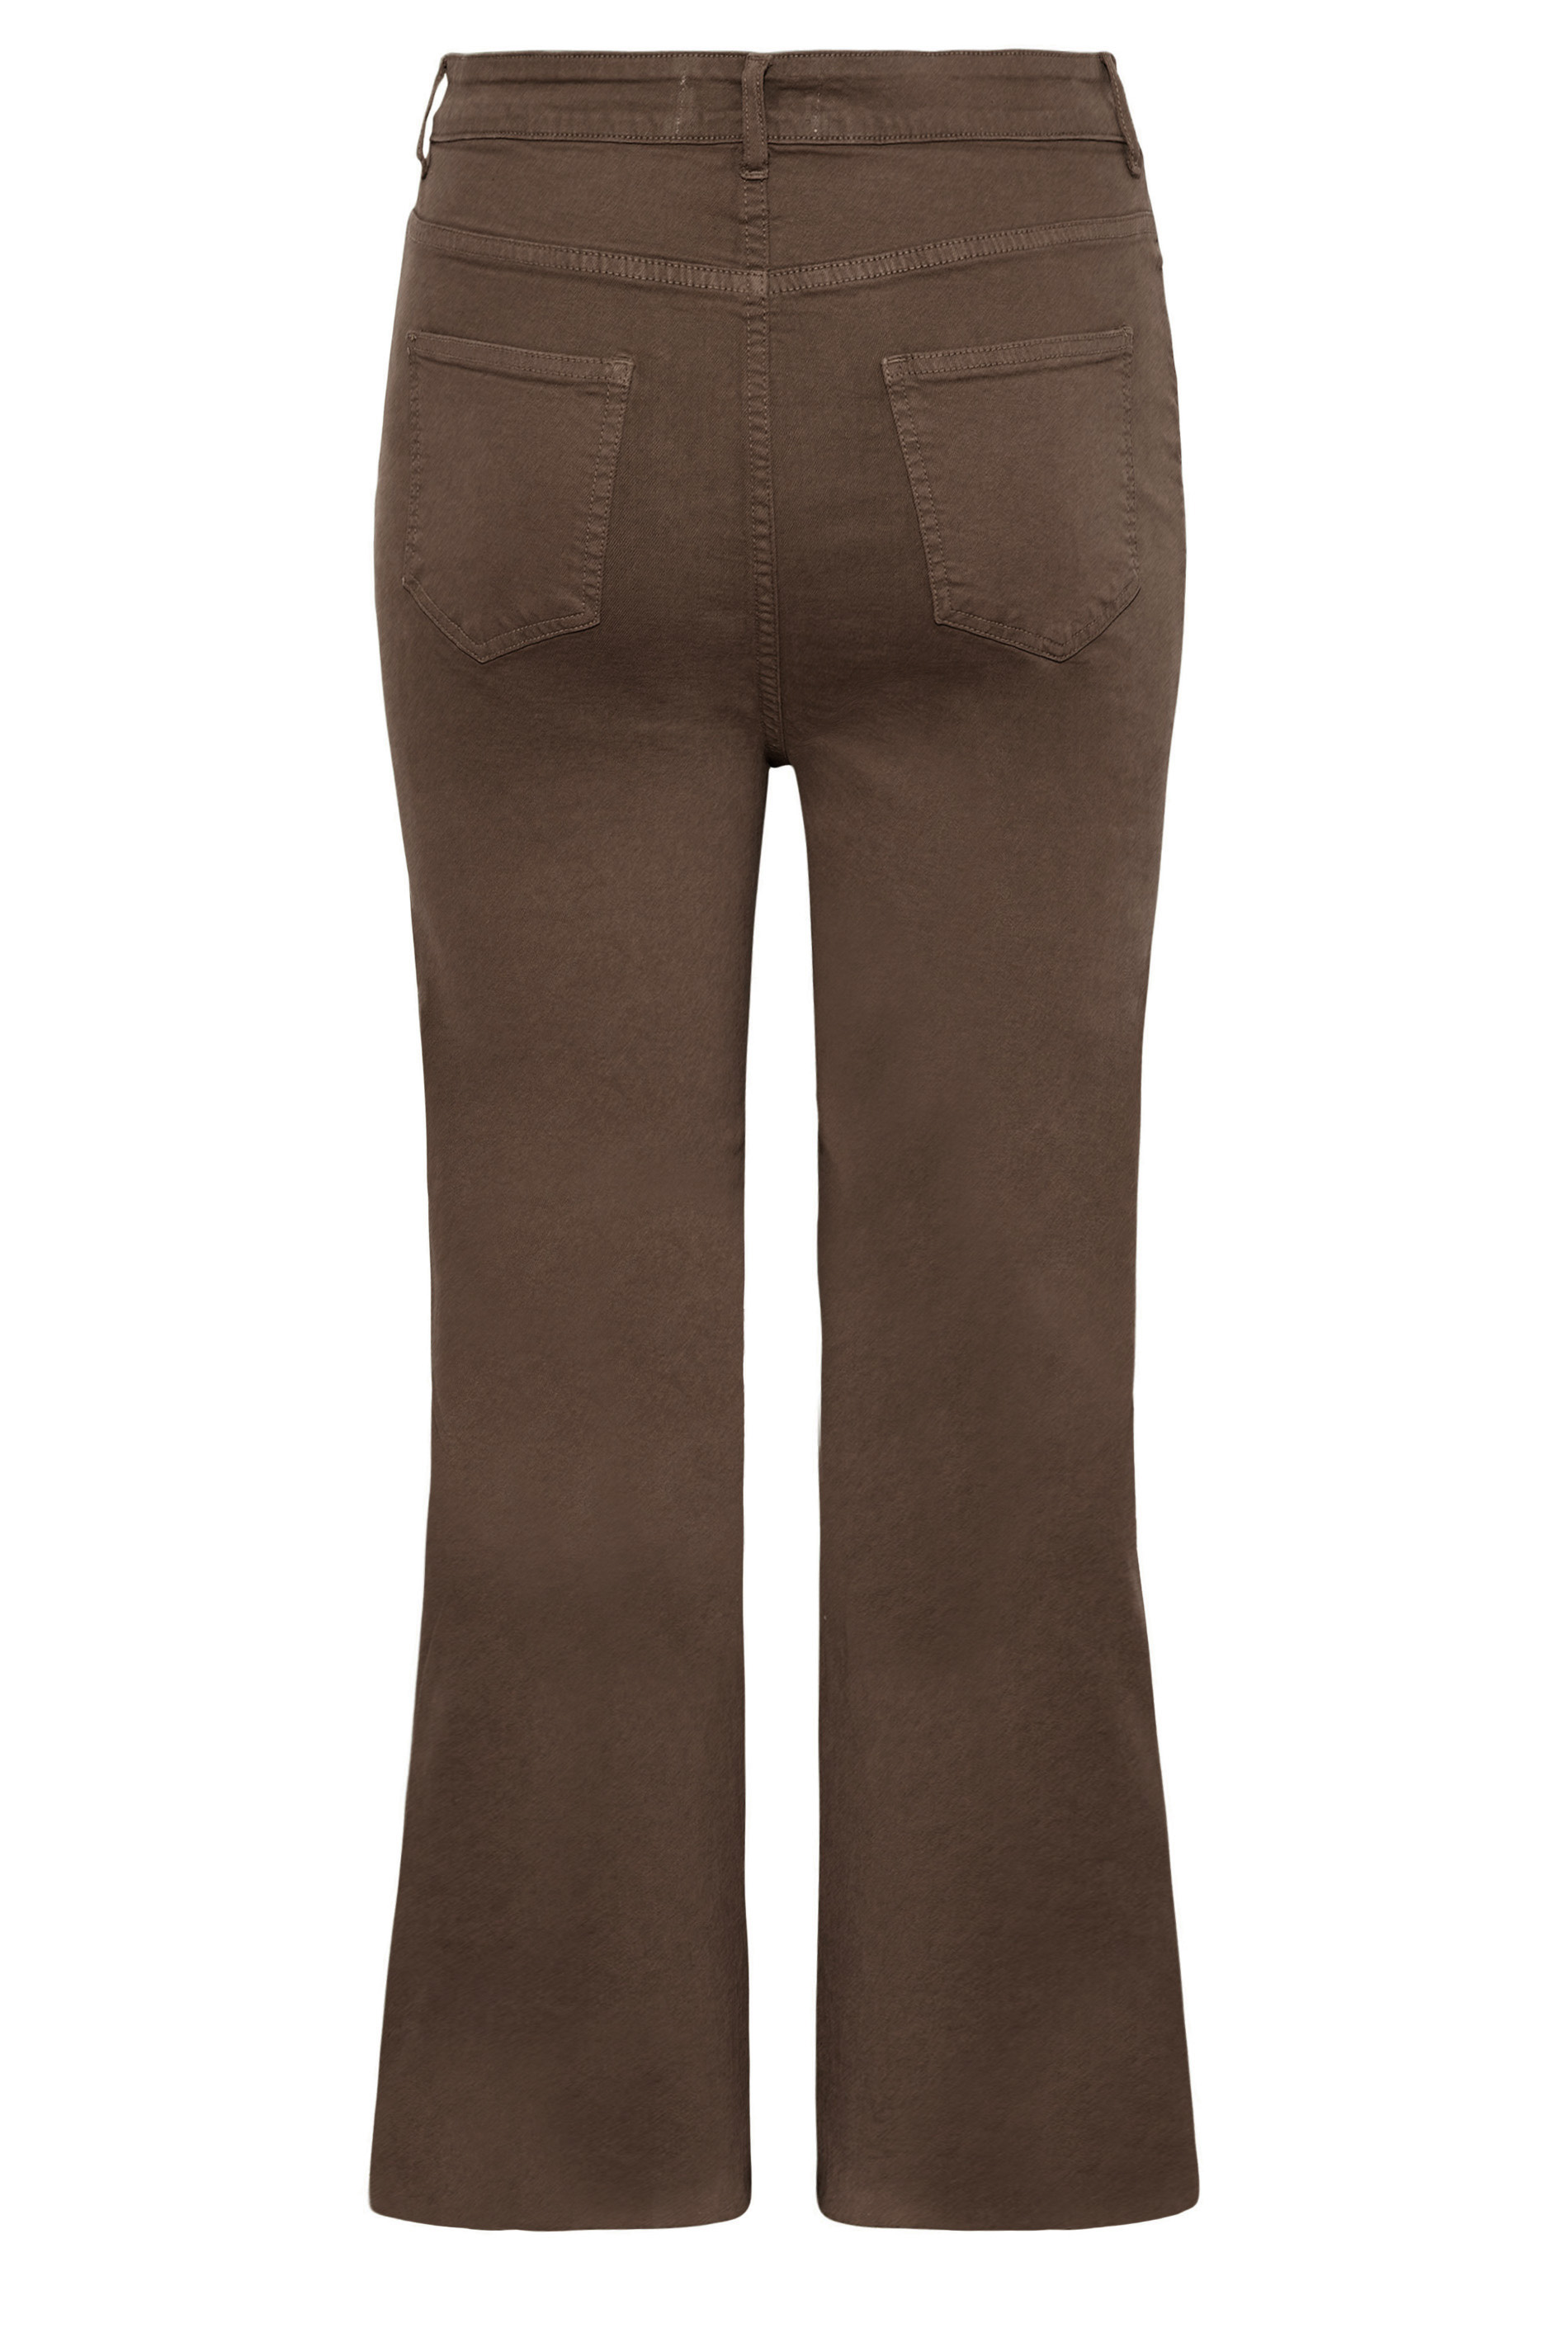 Plus Size Brown Stretch Wide Leg Jeans | Yours Clothing